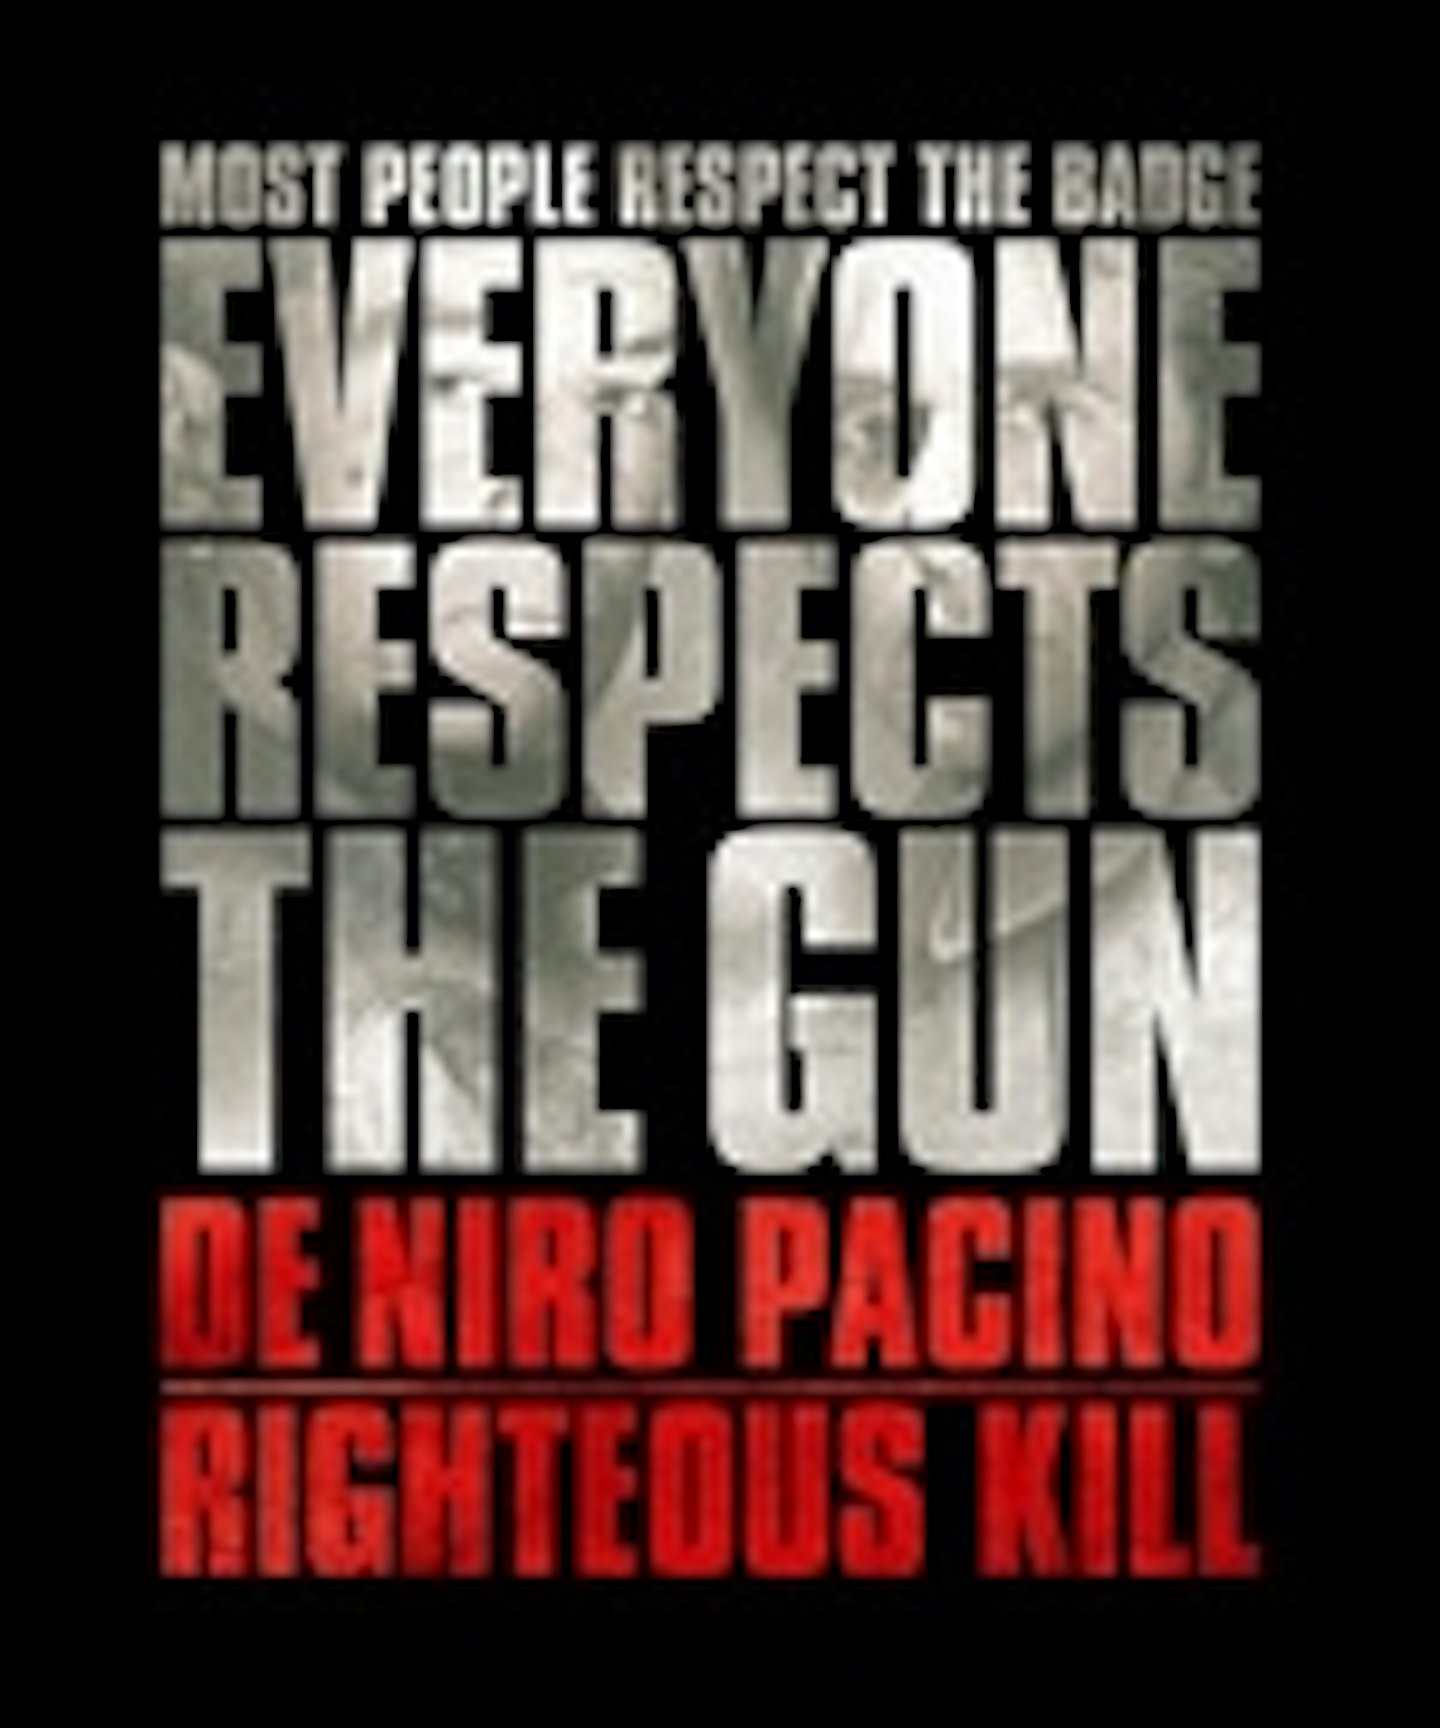 New Poster For Righteous Kill